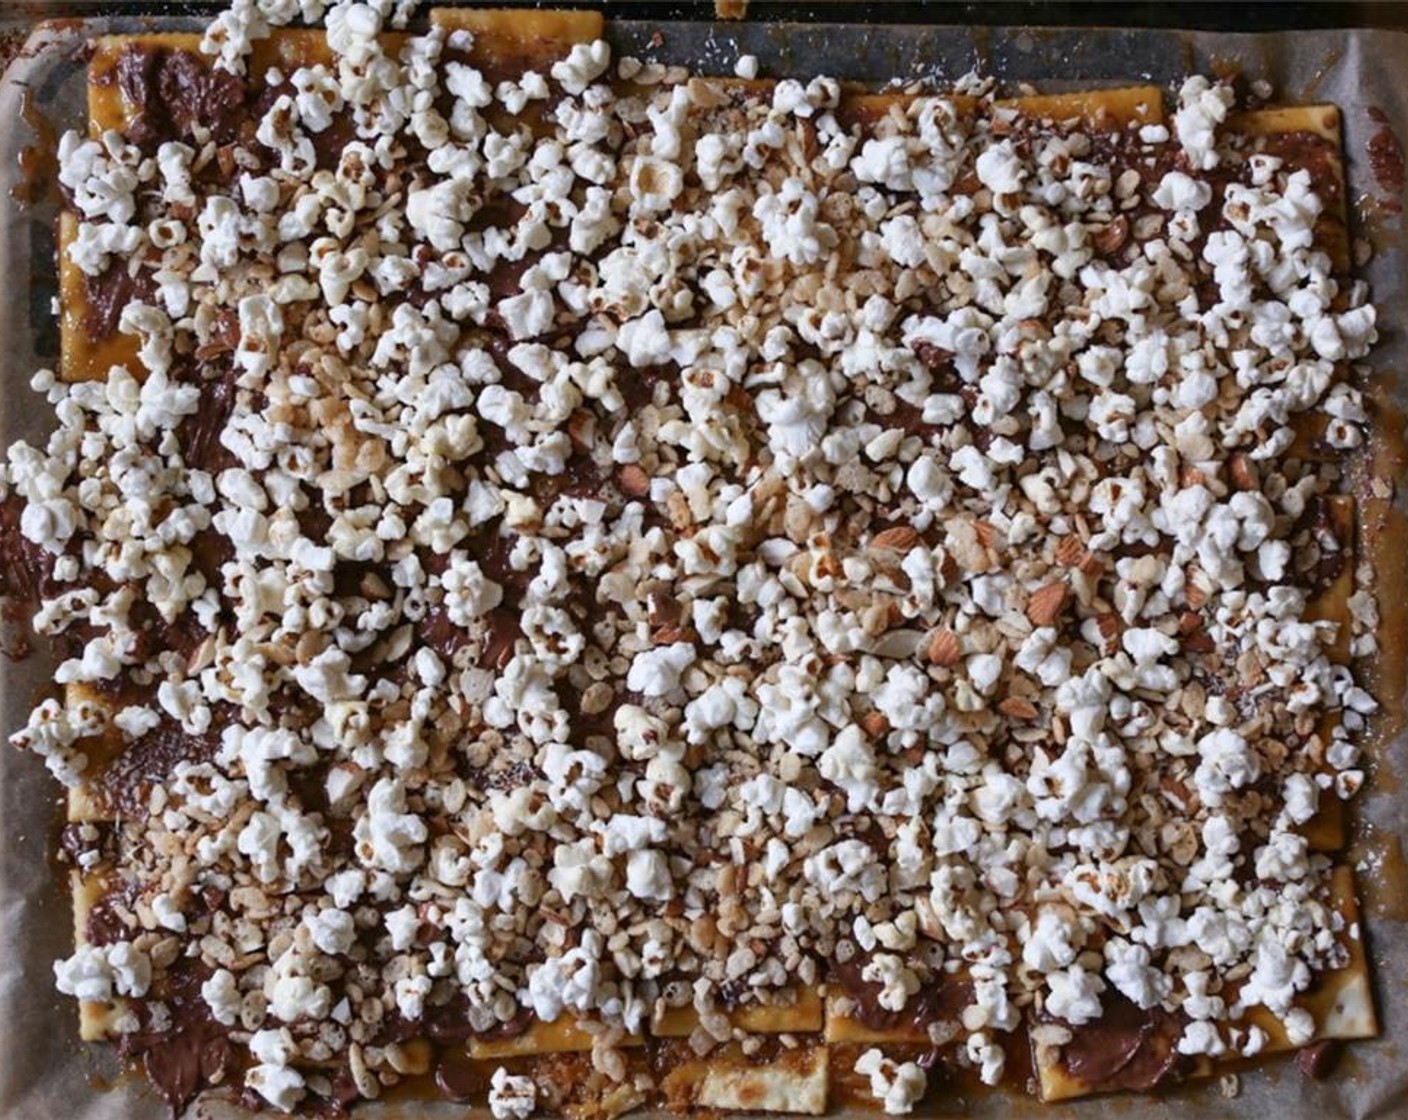 step 7 Using a spatula, quickly spread the chocolate chips all over the top of the toffee. Immediately add Popcorn (2 1/3 cups), Rice Krispies® Cereal (2/3 cup), and Raw Almonds (1/2 cup) in an even layer. It’s important that you do this fast so the toppings stick.